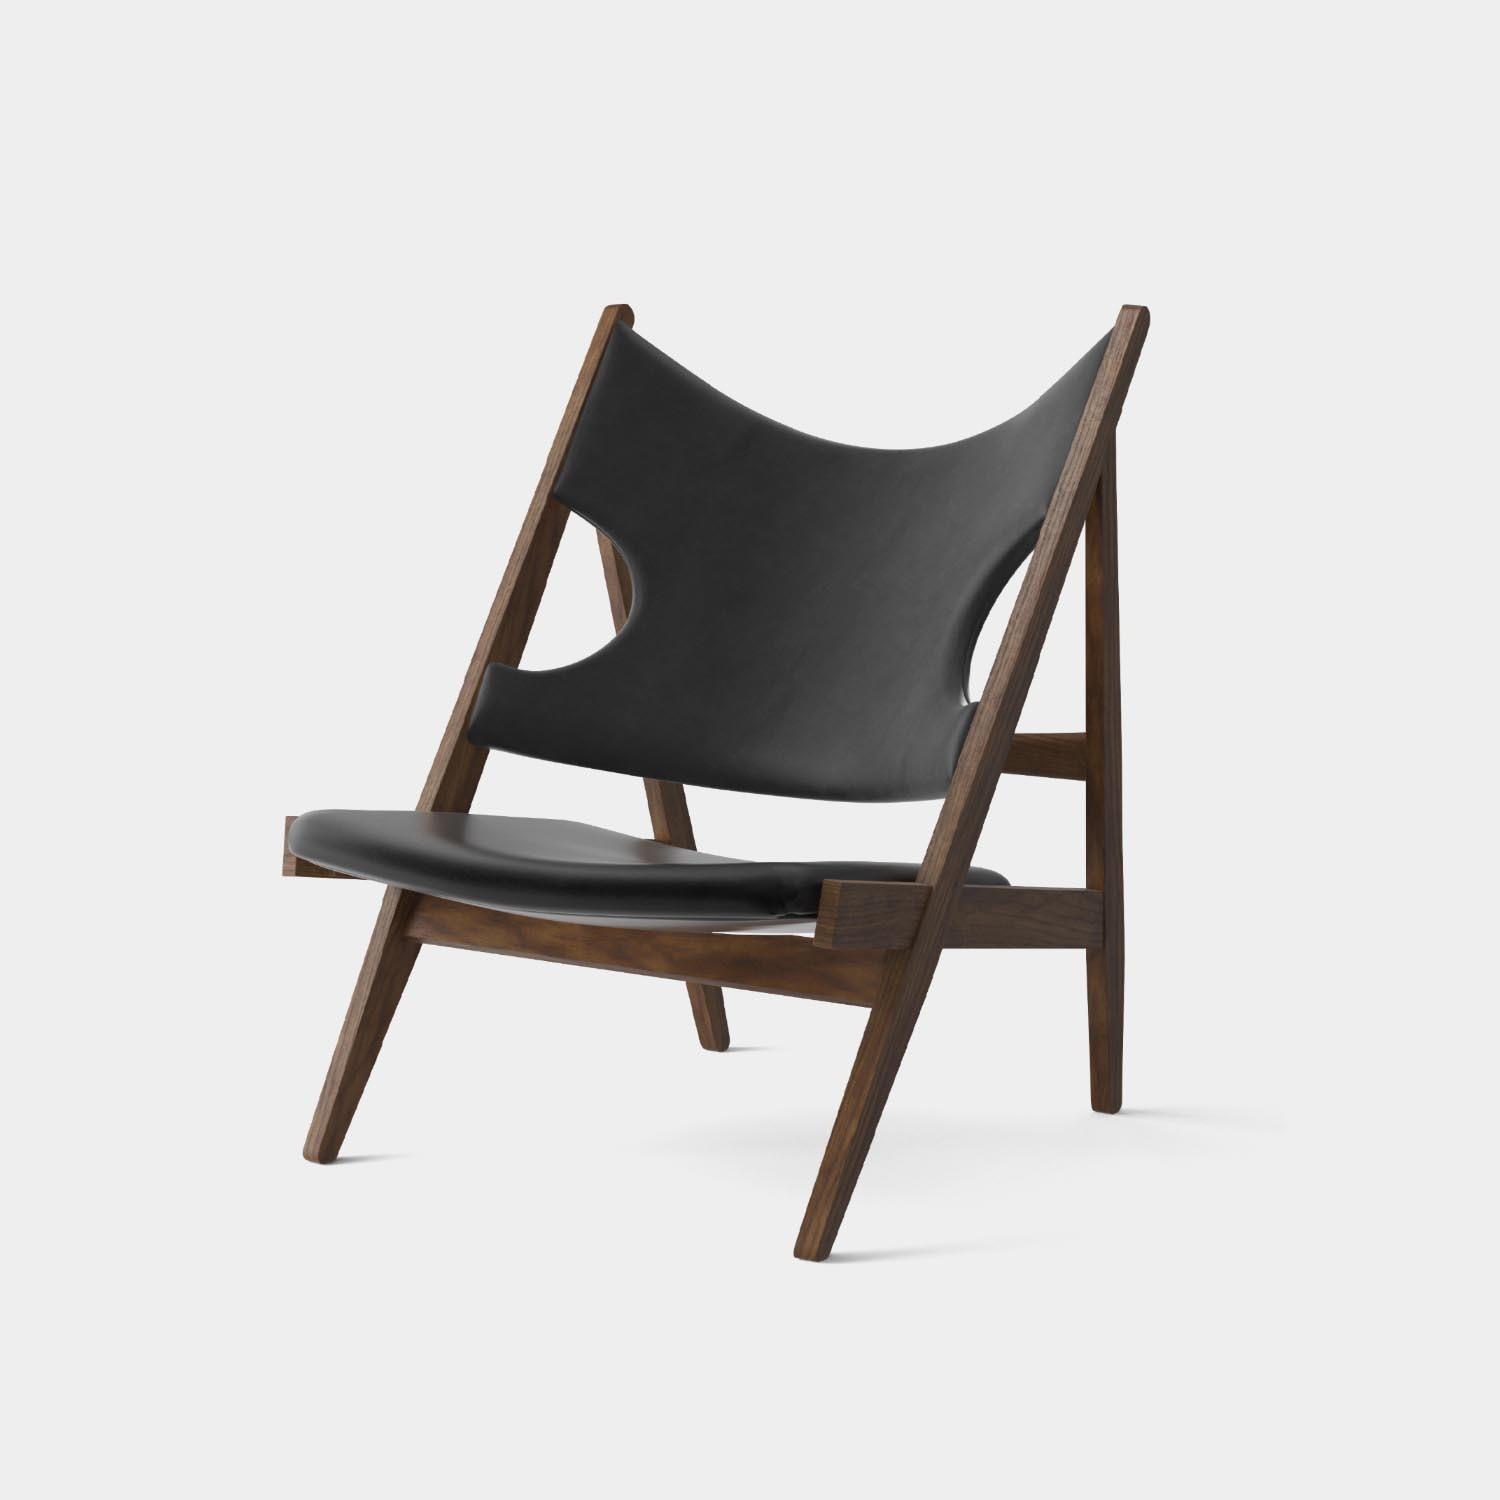 Knitting Lounge Chair, Walnut, Designer Collection, Black Leather